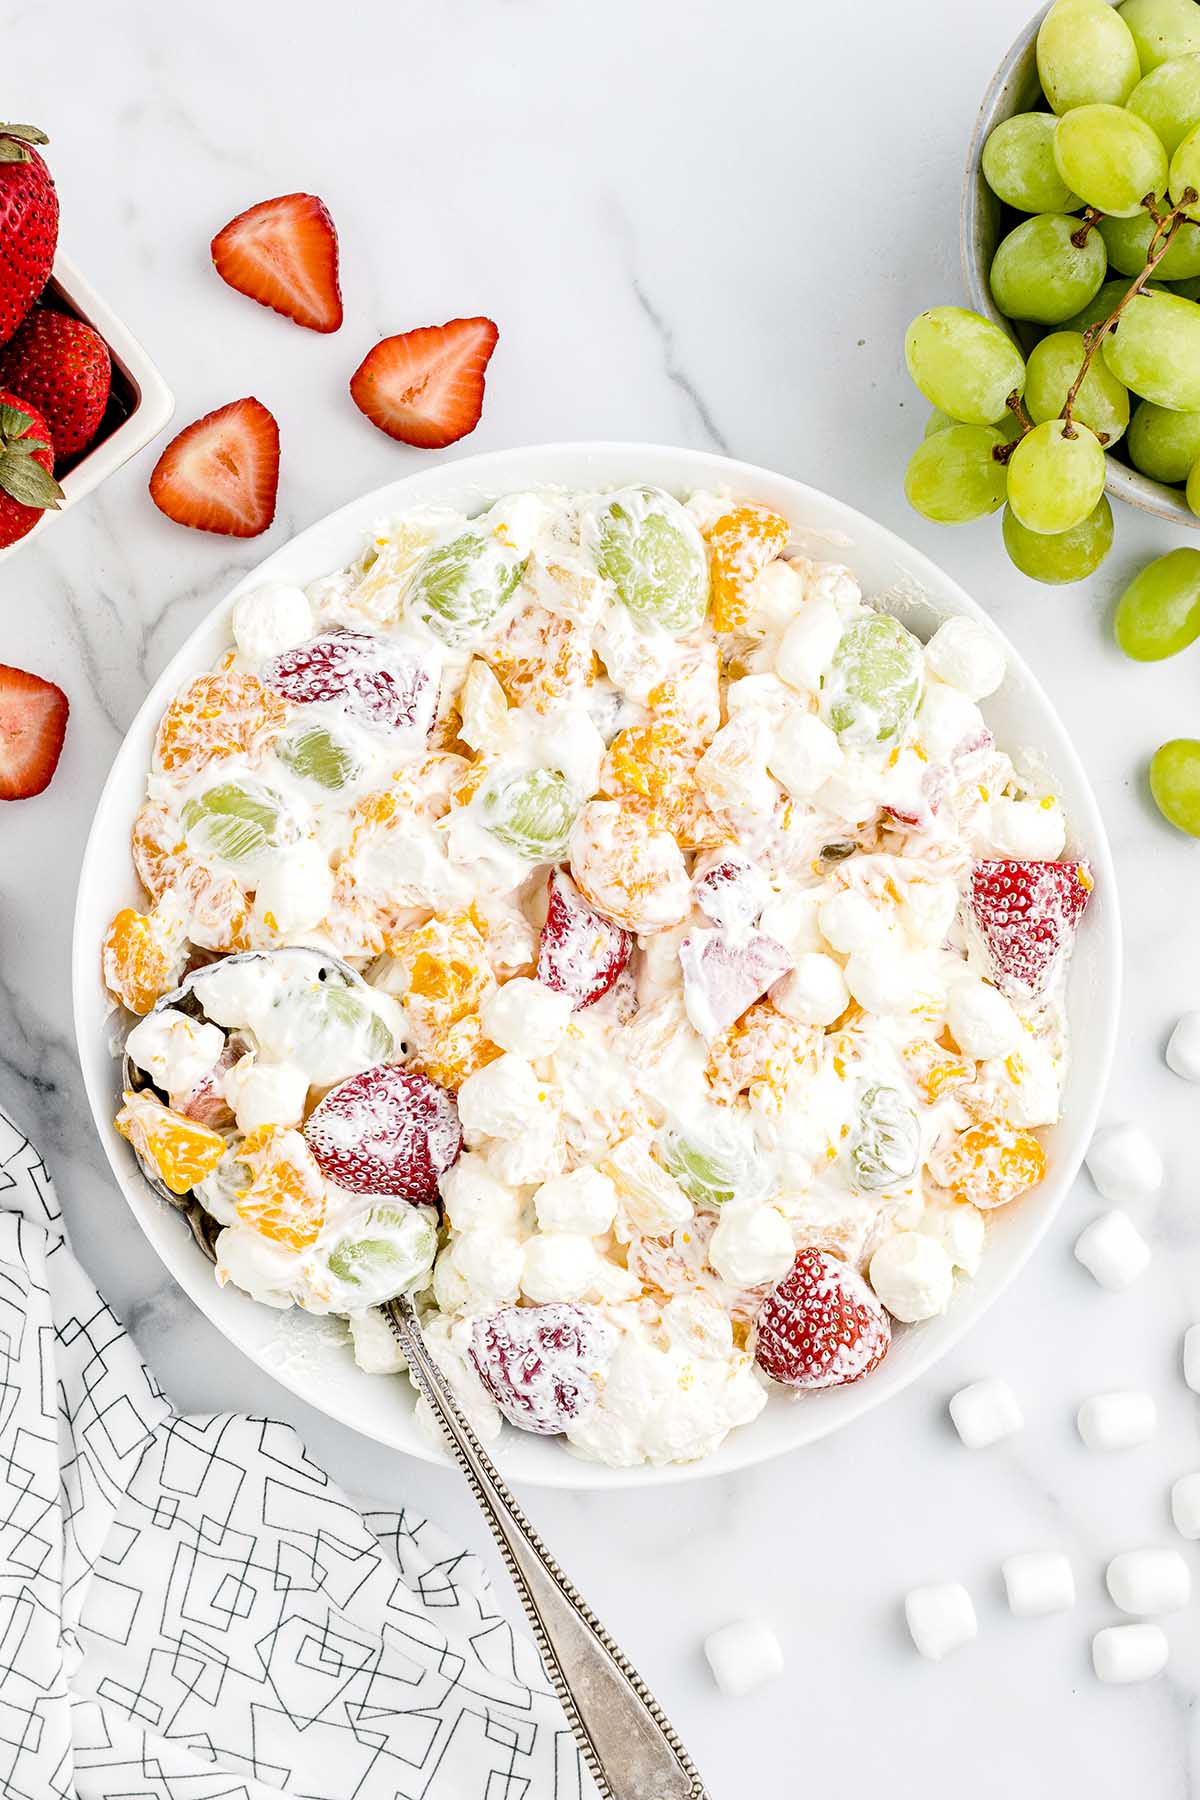 fruit salad recipes, 45 Easy Fruit Salad Recipes You Need To Make NOW!